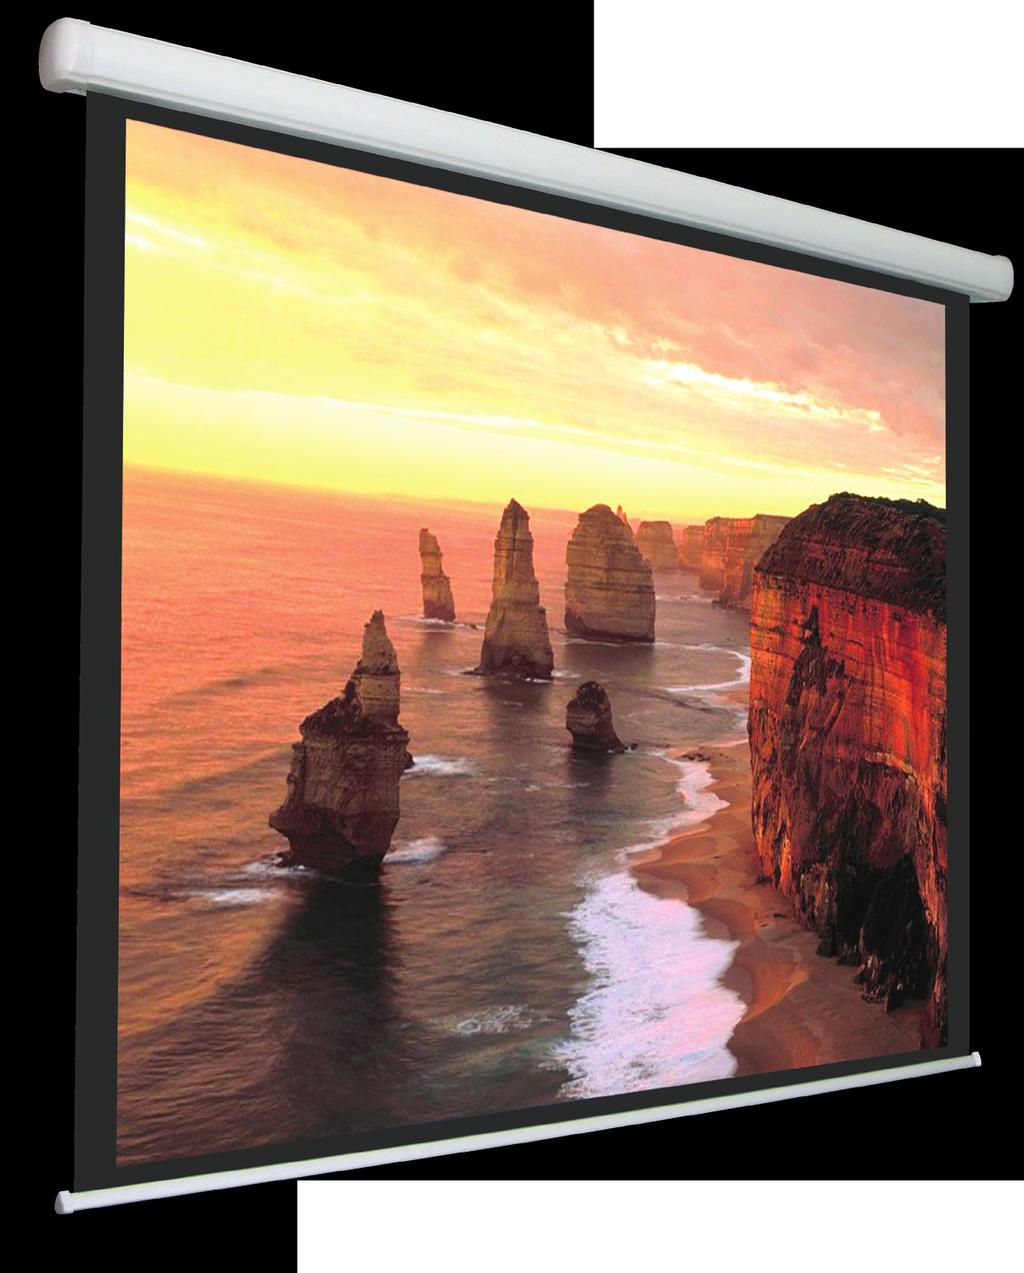 CINEDOMUS PROJECTION SCREENS with electrical command, varnished aluminium case CINEDOMUS is the new range of professional electrical screens, developed and designed mainly for domestic use in home